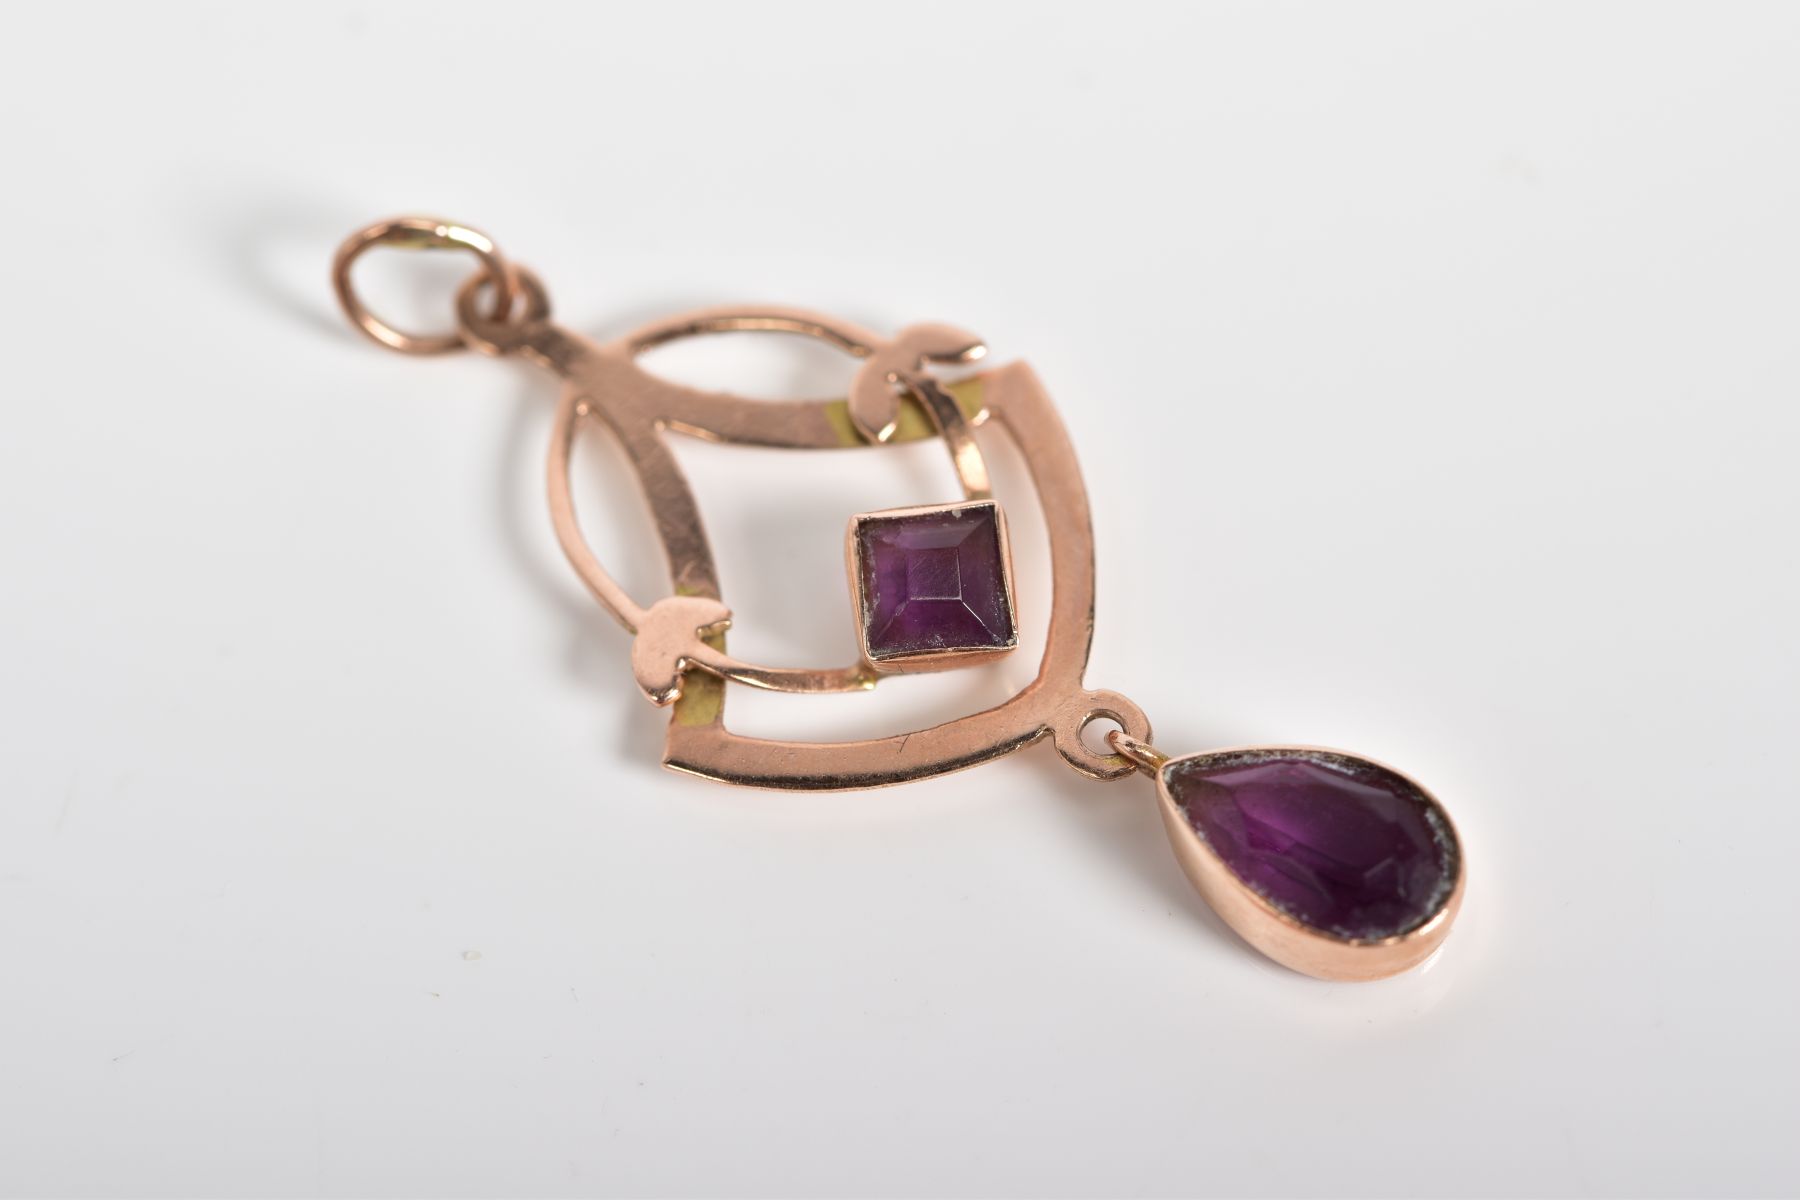 AN AMETHYST PENDANT, of openwork design set with a square cut amethyst suspending a further pear cut